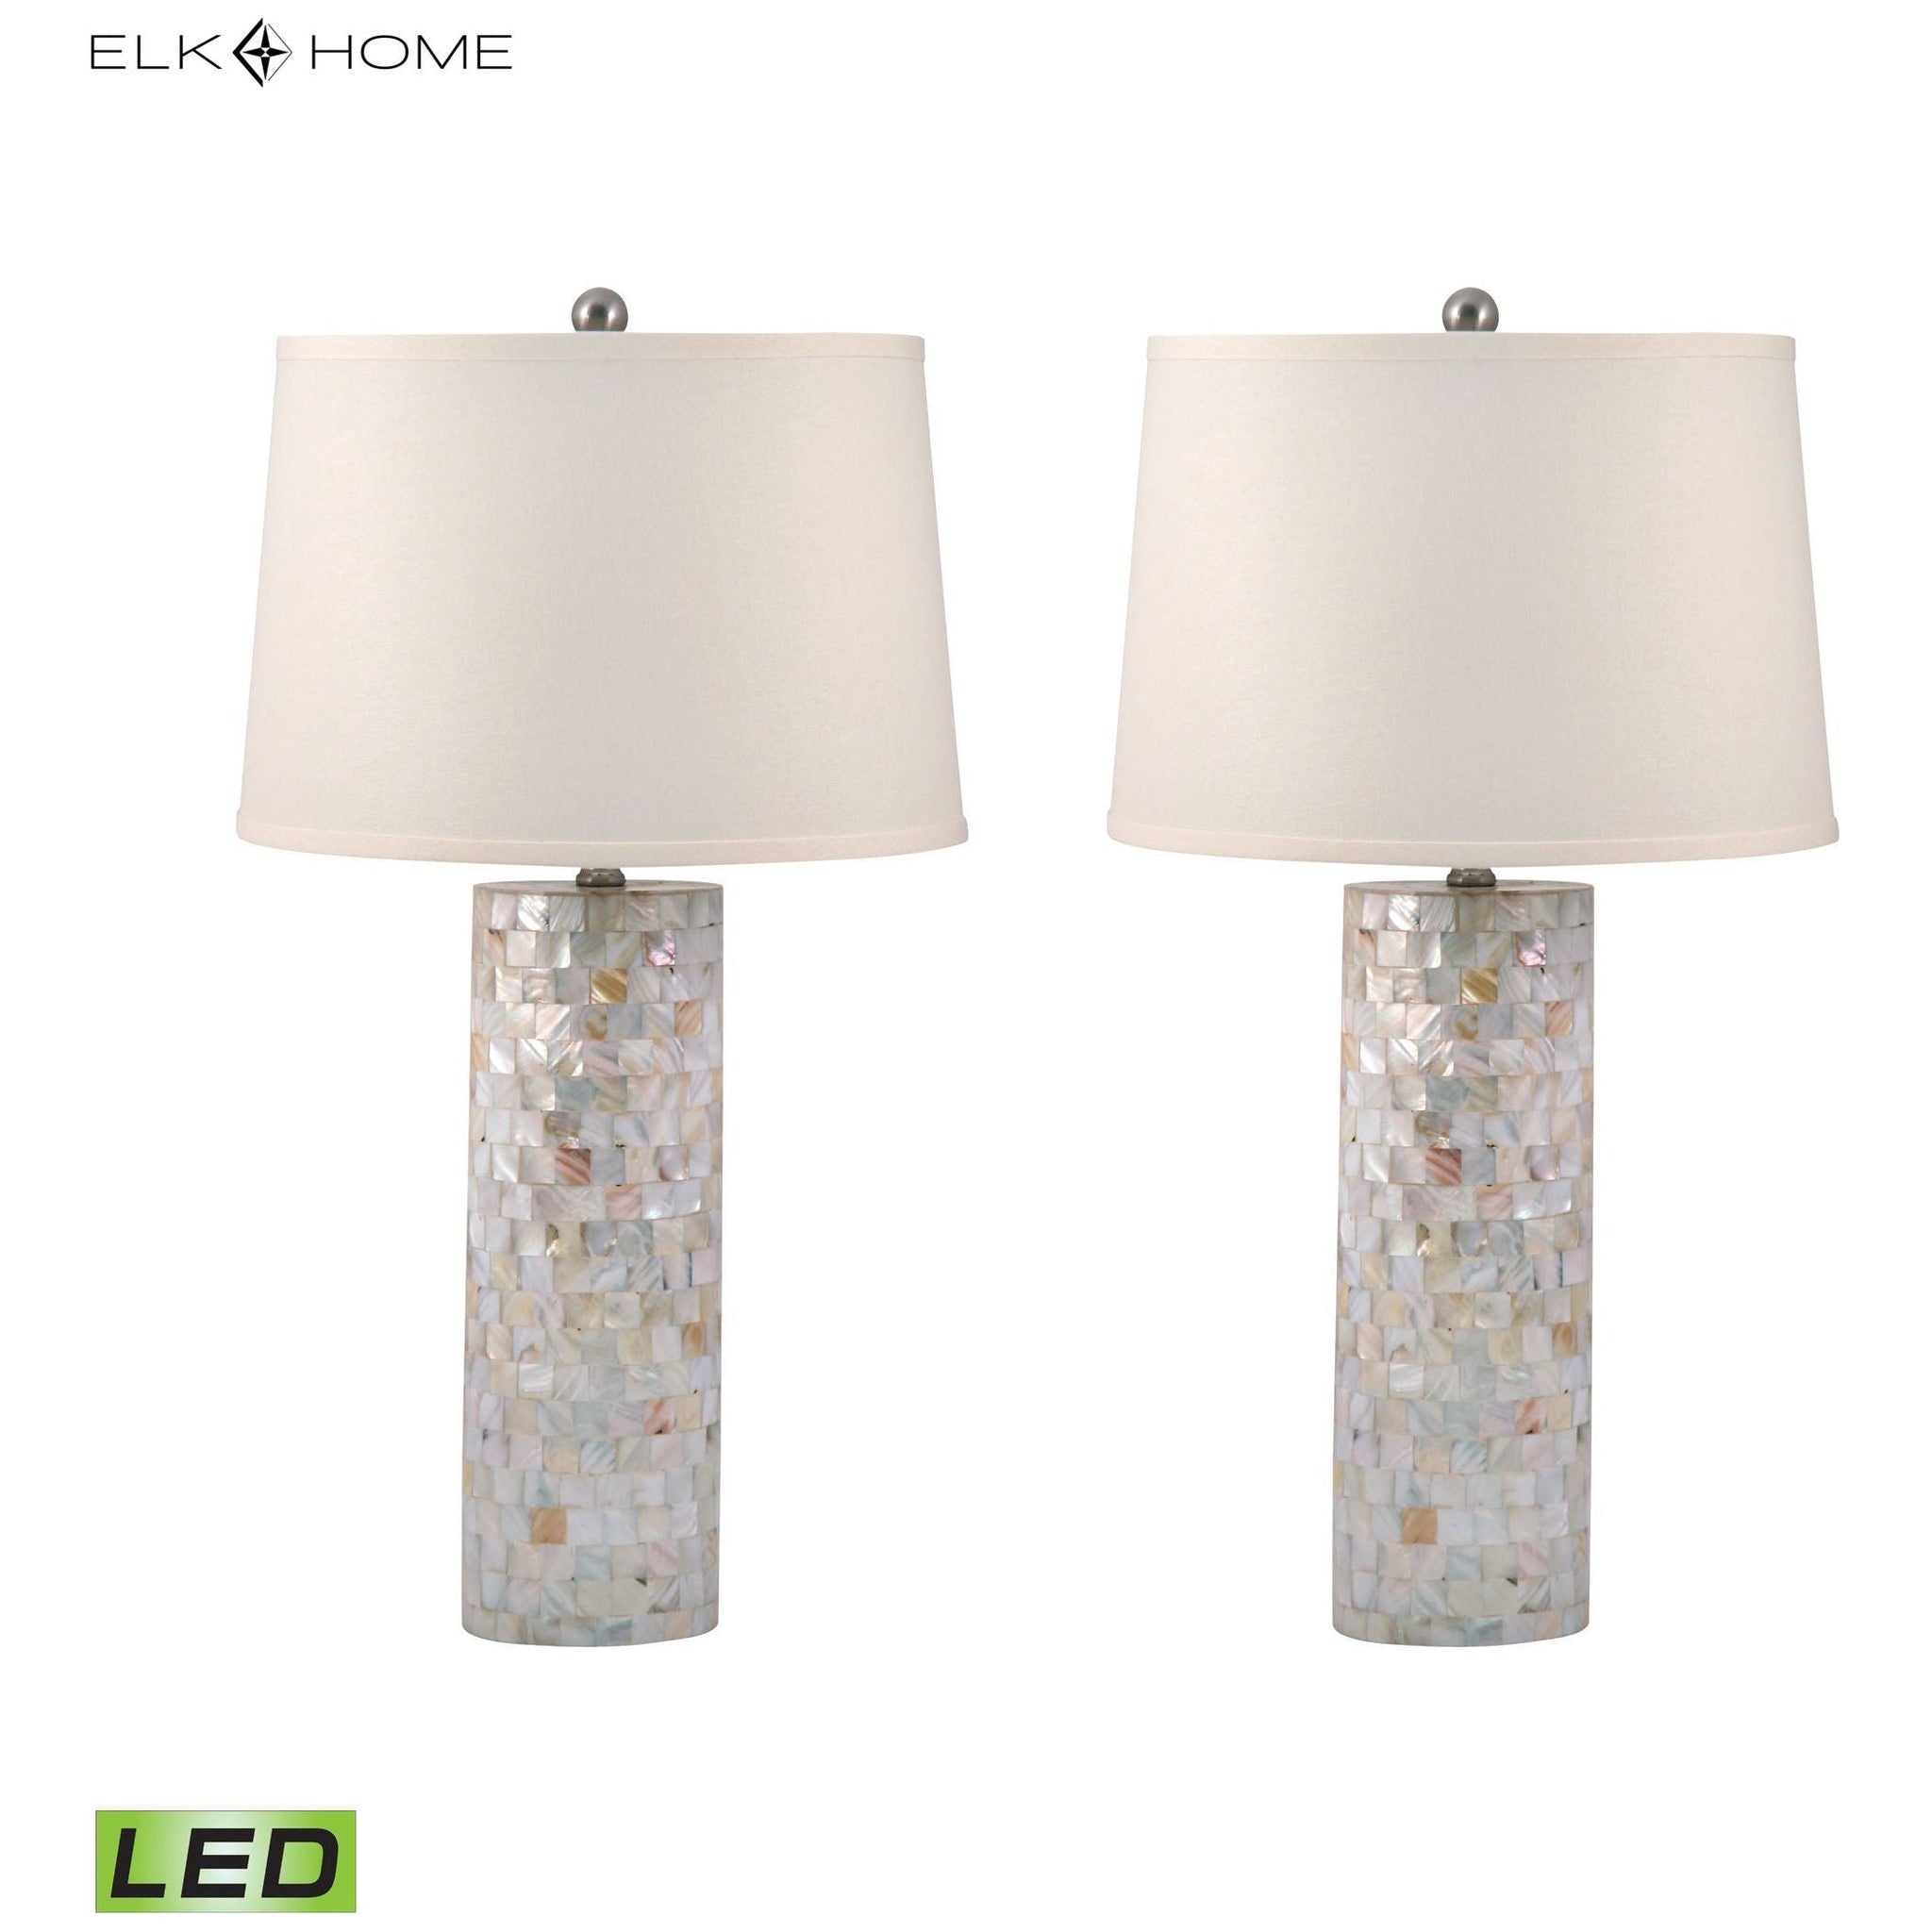 Mother of Pearl 28" High 2-Light Table Lamp (Set of 2)